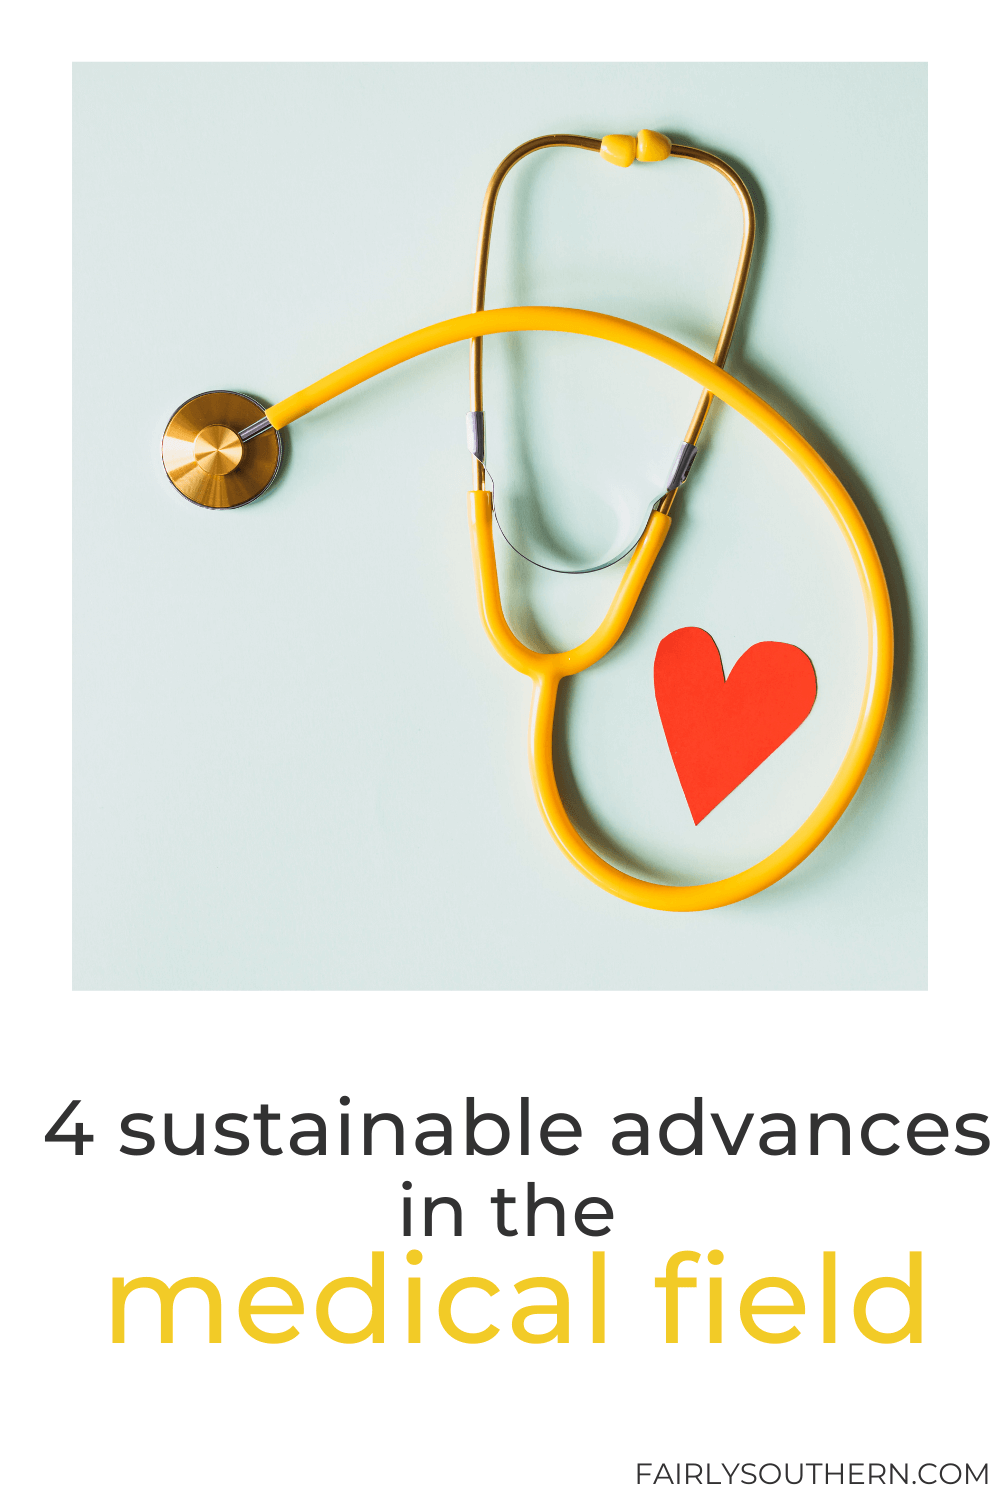 4 Sustainable Advances in the Medical Field - Fairly Southern